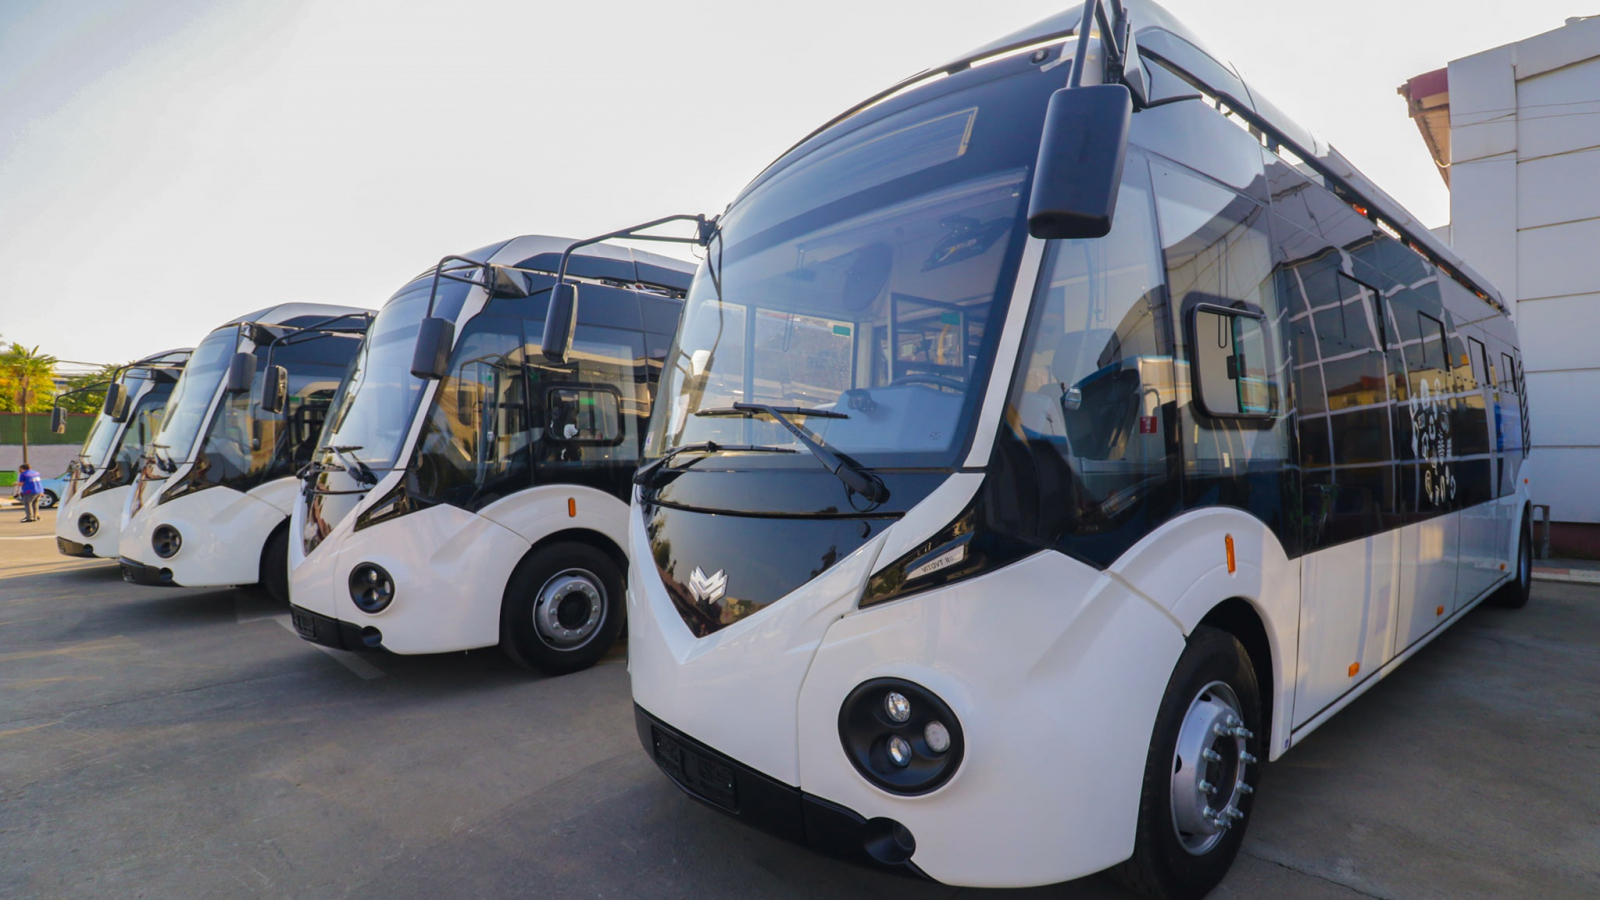 Georgia: City of Batumi with new electric buses thanks to EU and EBRD